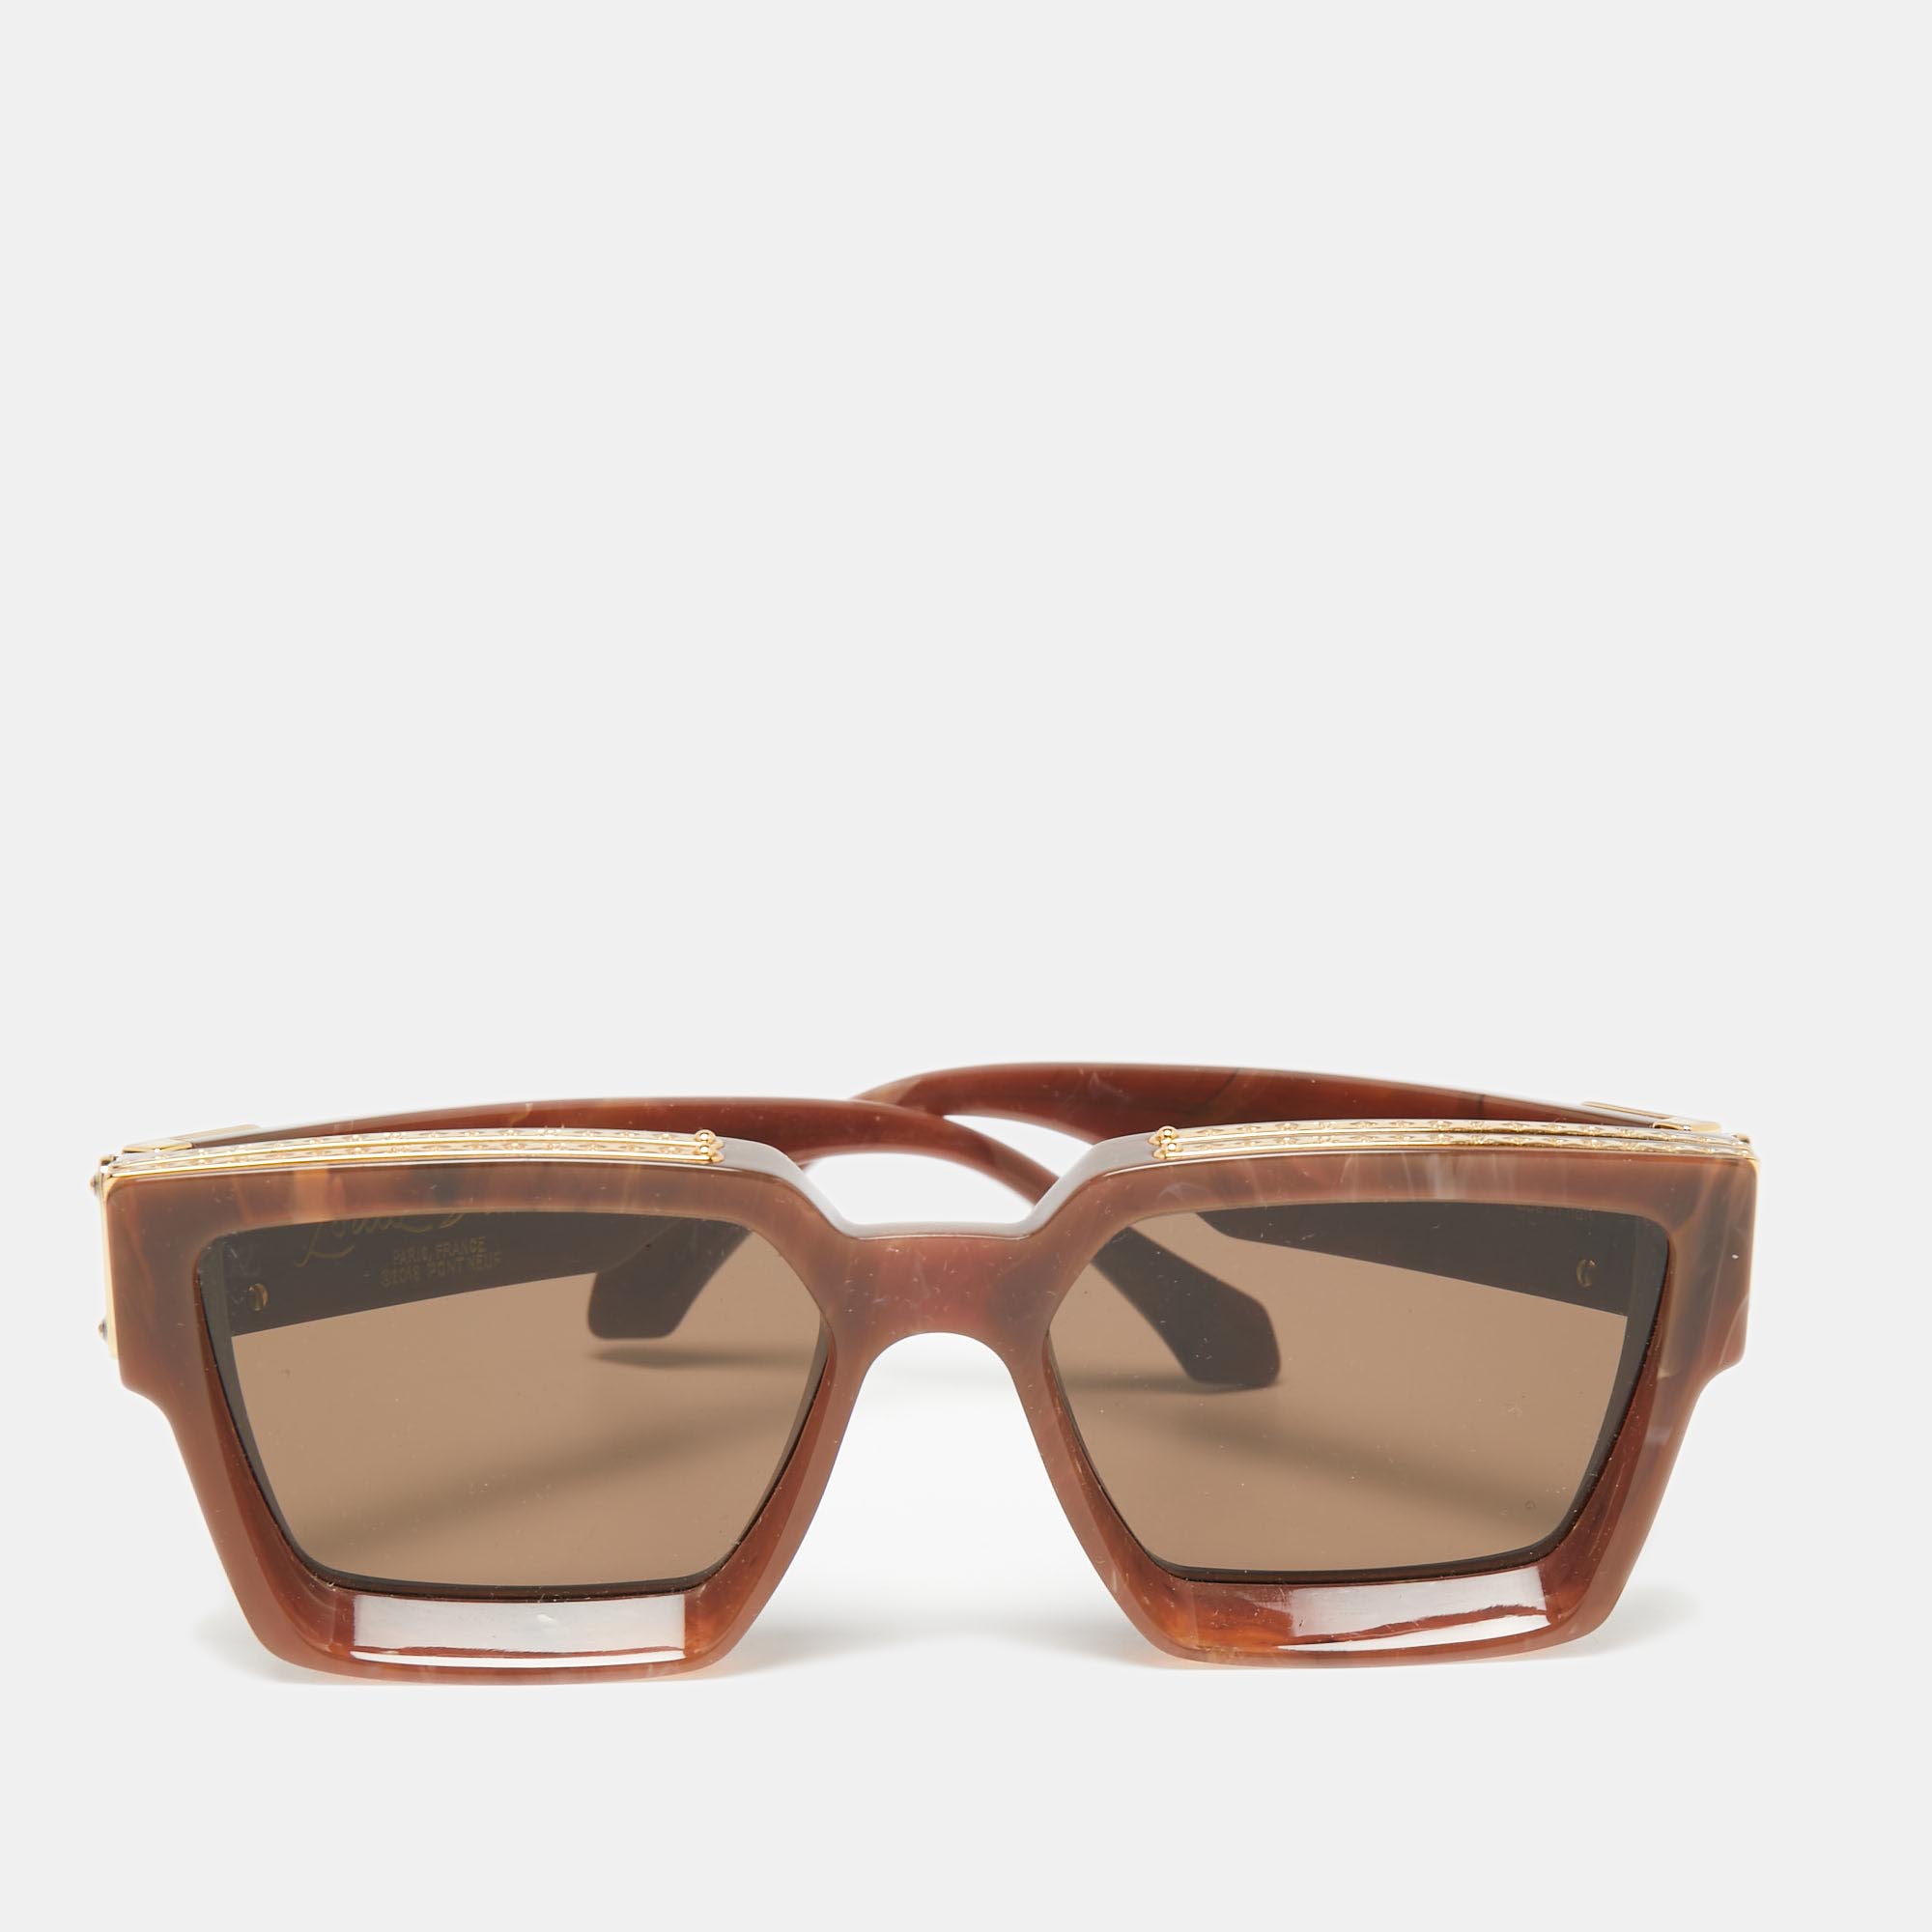 Sunglasses Louis Vuitton 1.1 the Millionaires Sunglasses worn by Hamza in  his clip Henny Pop